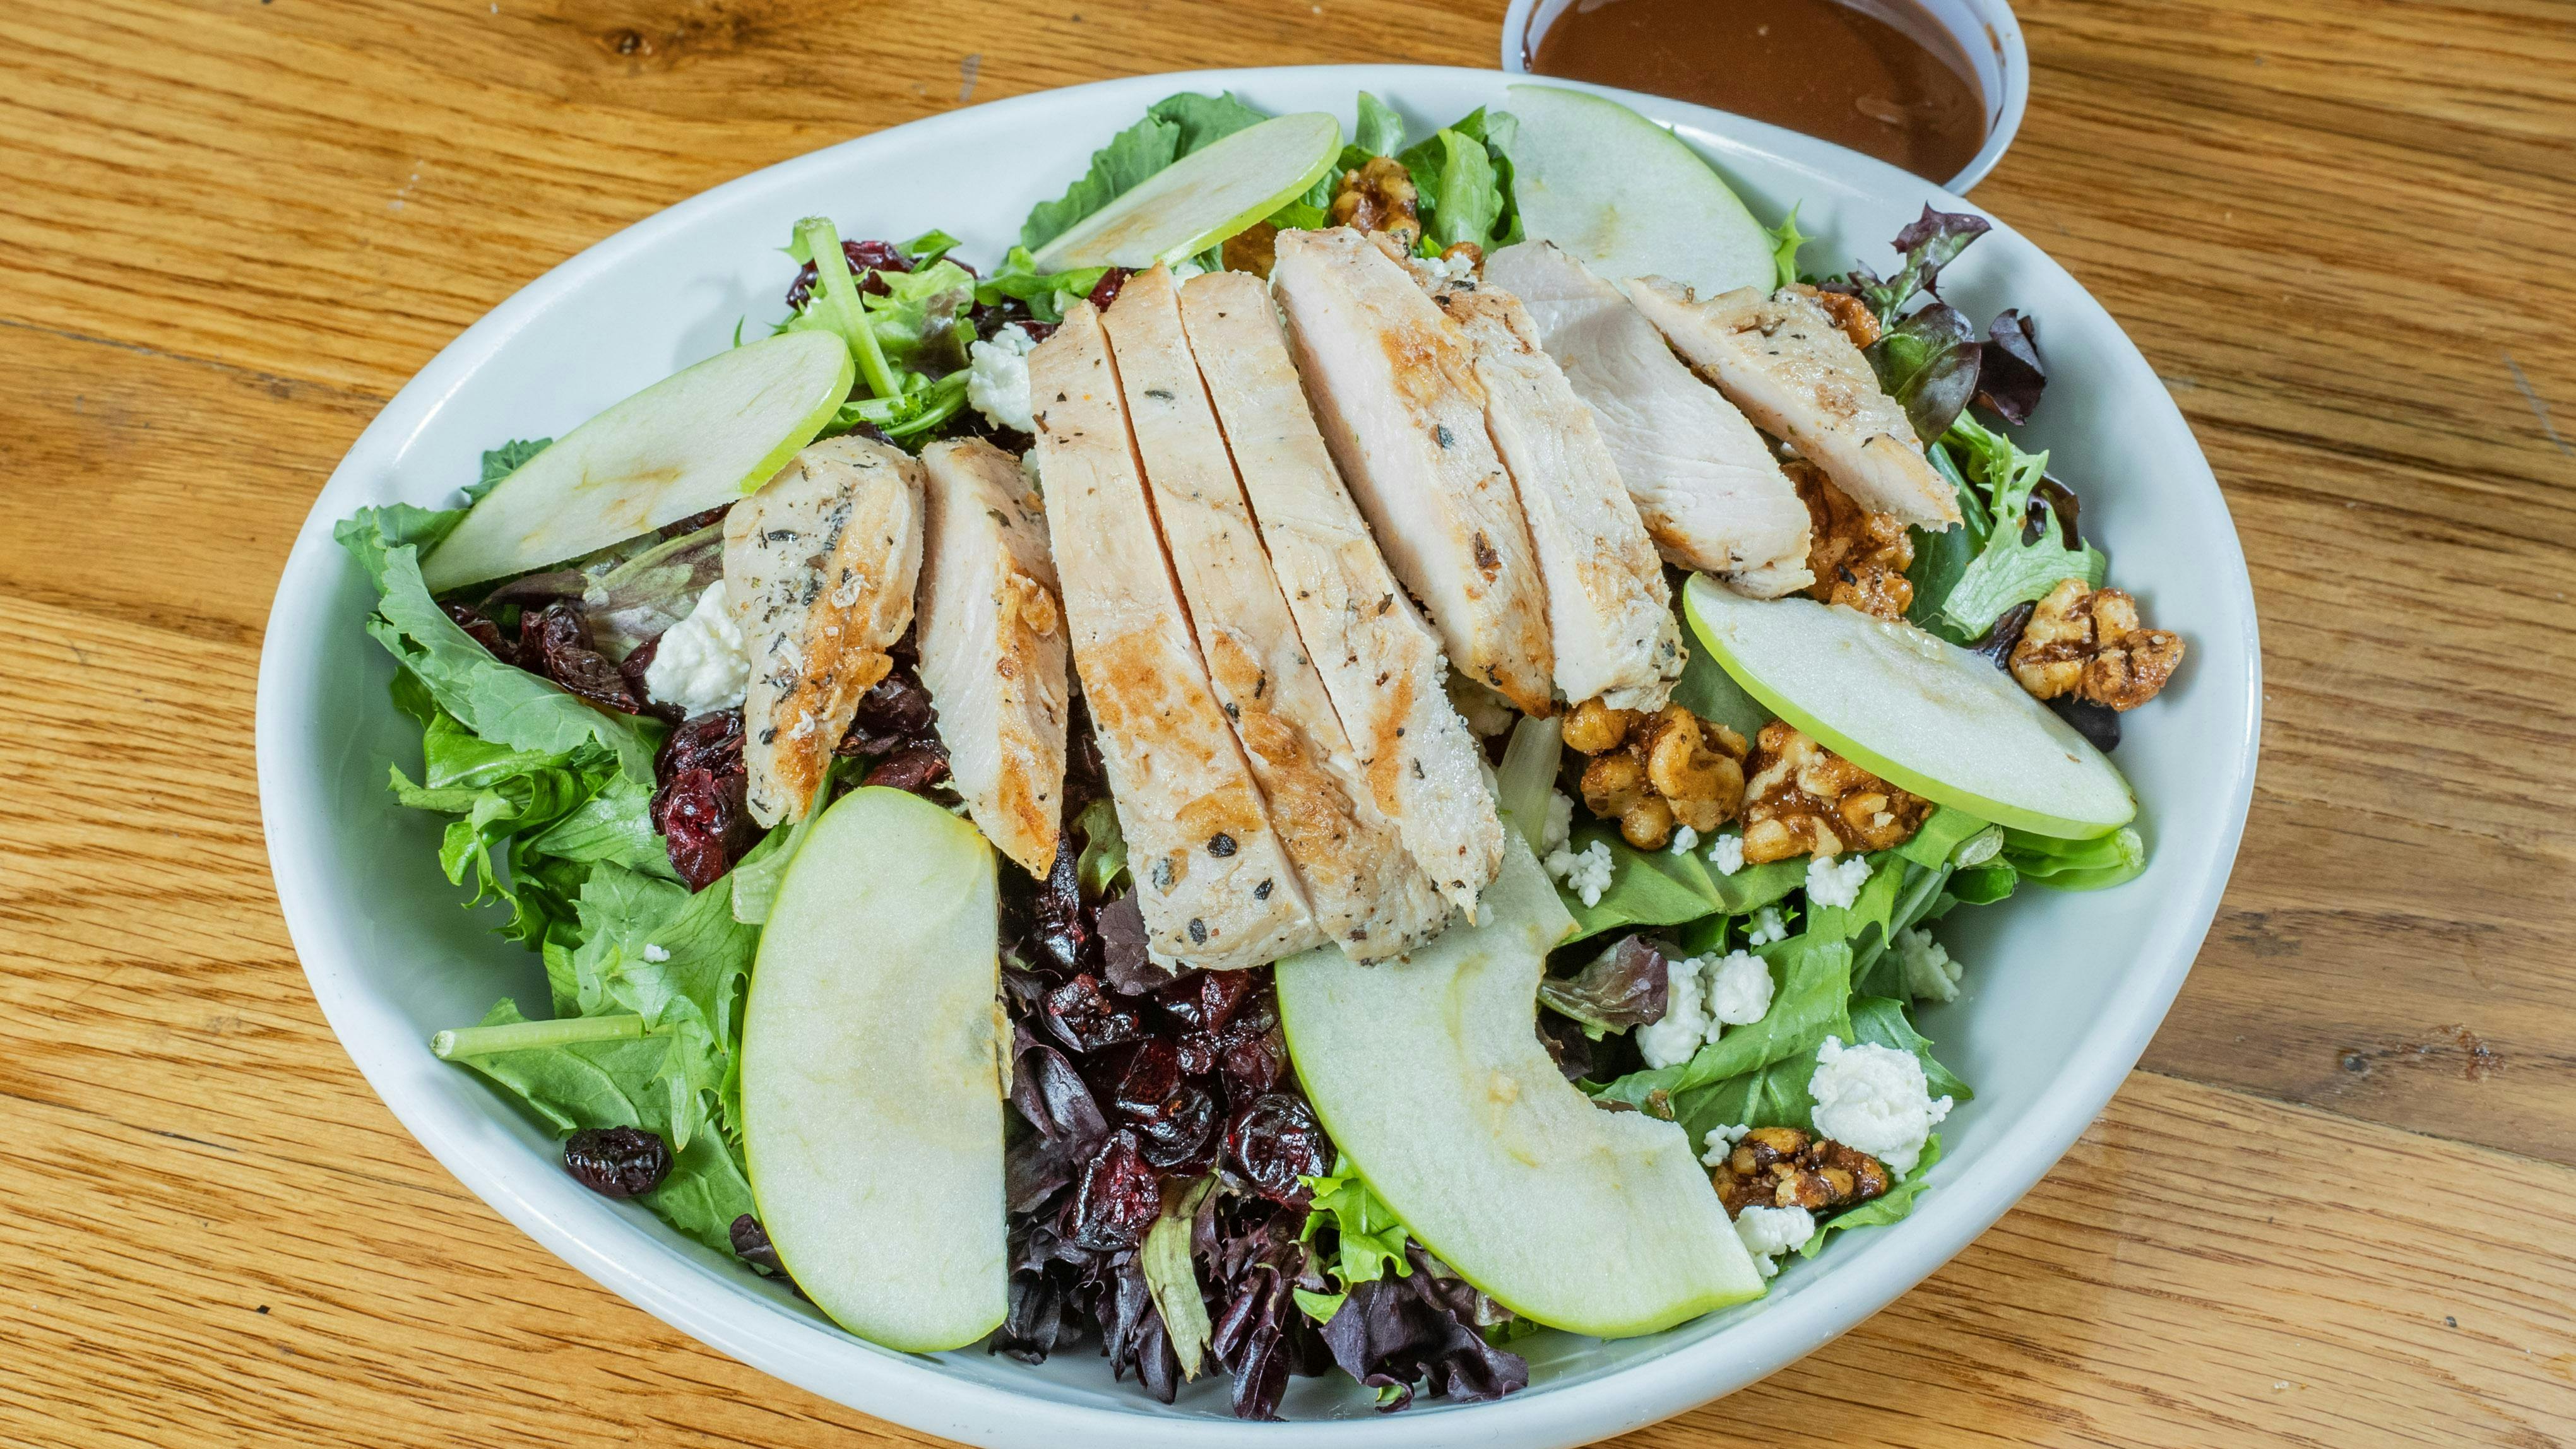 Happy Salad with Chicken from Happy Chicks - Burnet Rd in Austin, TX